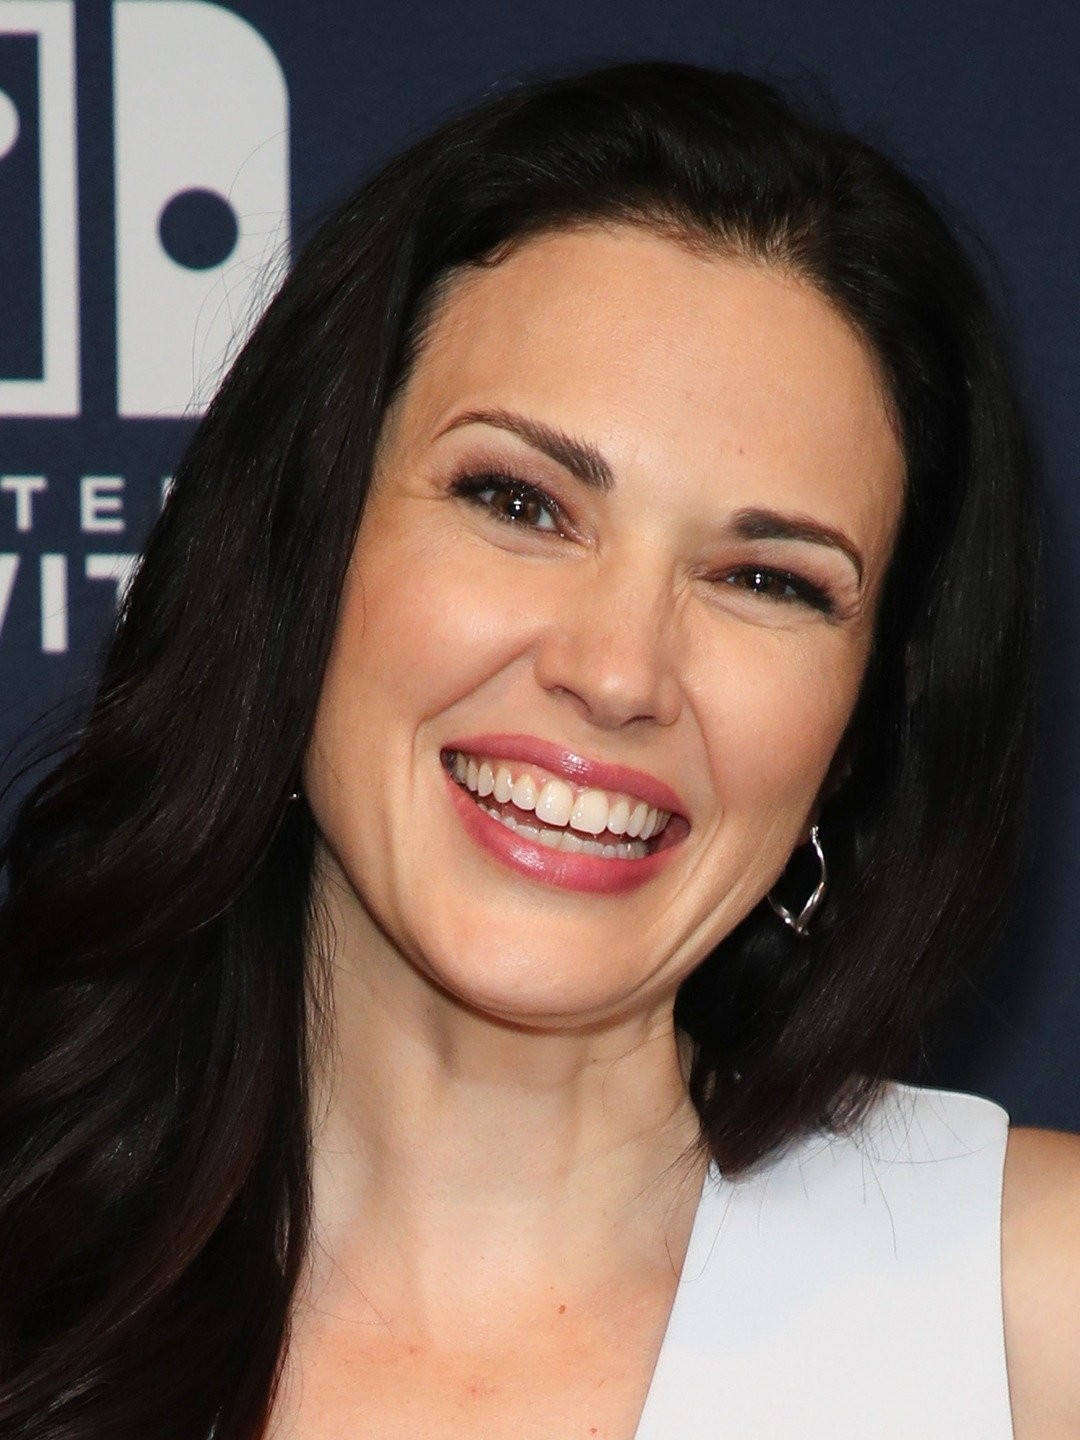 Laura mennell movies and tv shows